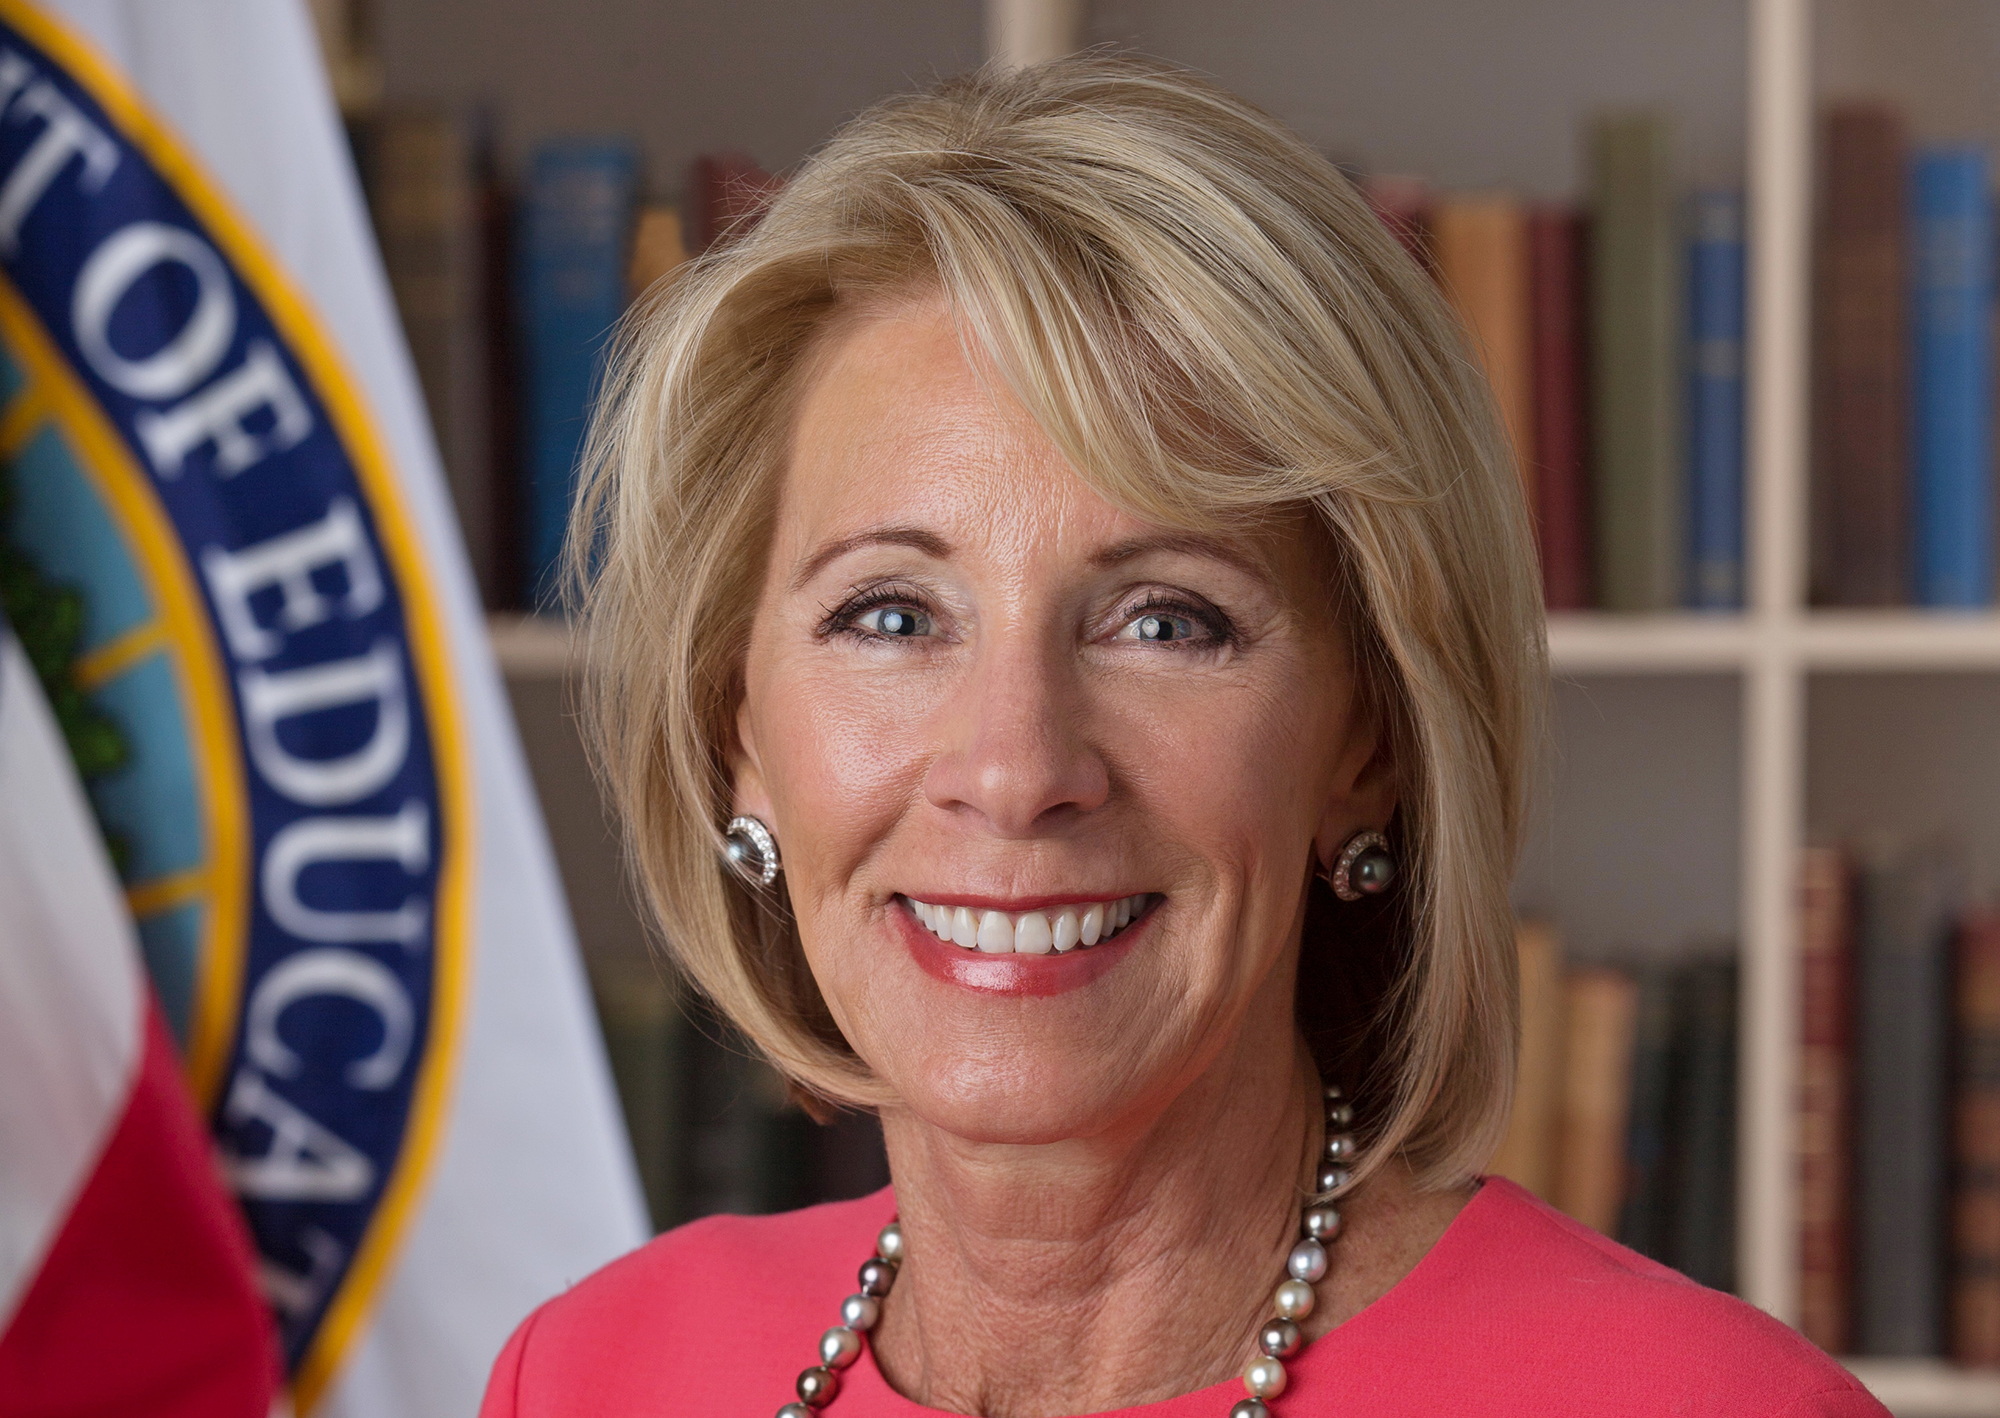 States Accuse Betsy DeVos Of Failing To Protect Students From Sketchy For-Profit Schools